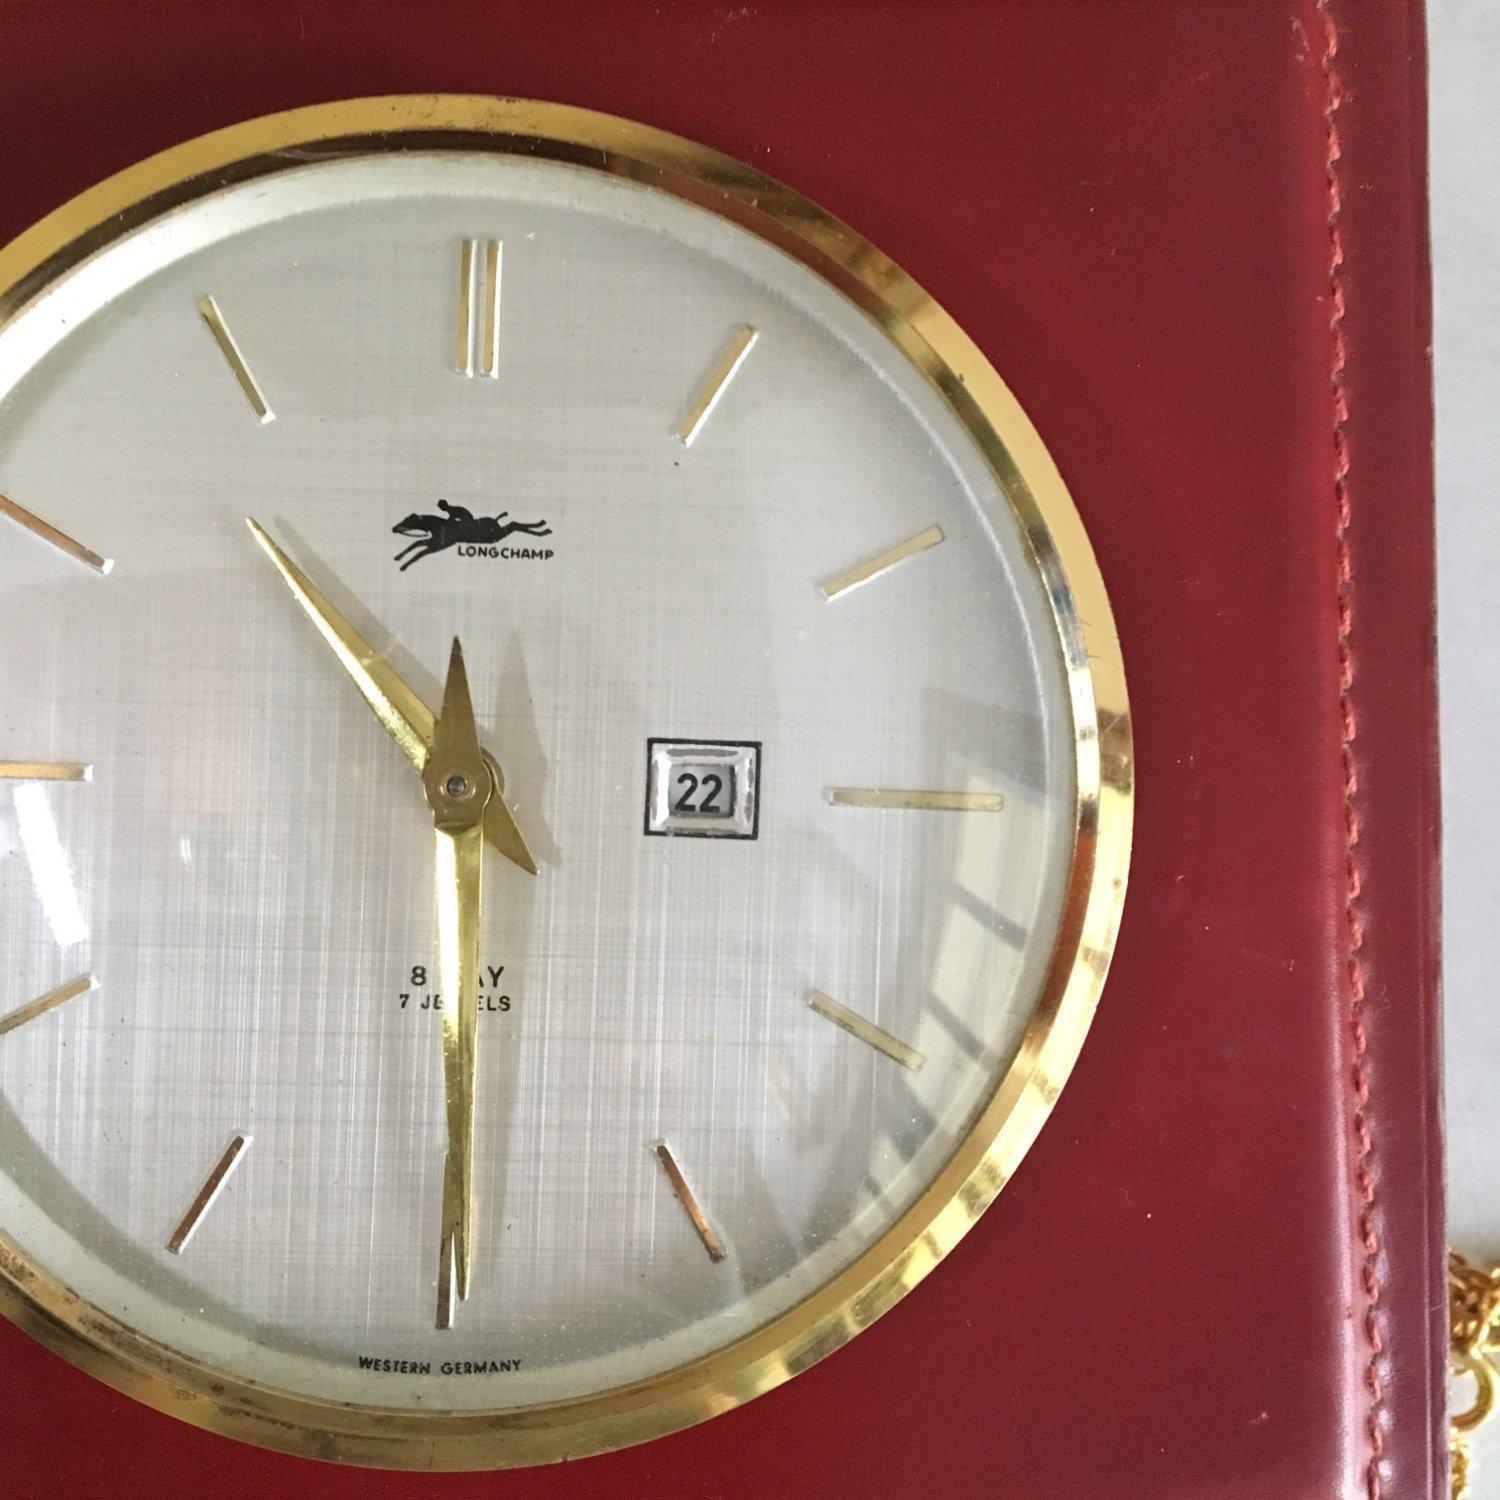 Here is a nice table clock with box of the brand Longchamp. Can be use as jewelry box for women, or desk box for men.

In wood covered with burgundy leather and brass dial.

The clock is 8 days and 7 jewels.

Nice gift to offer!

This box